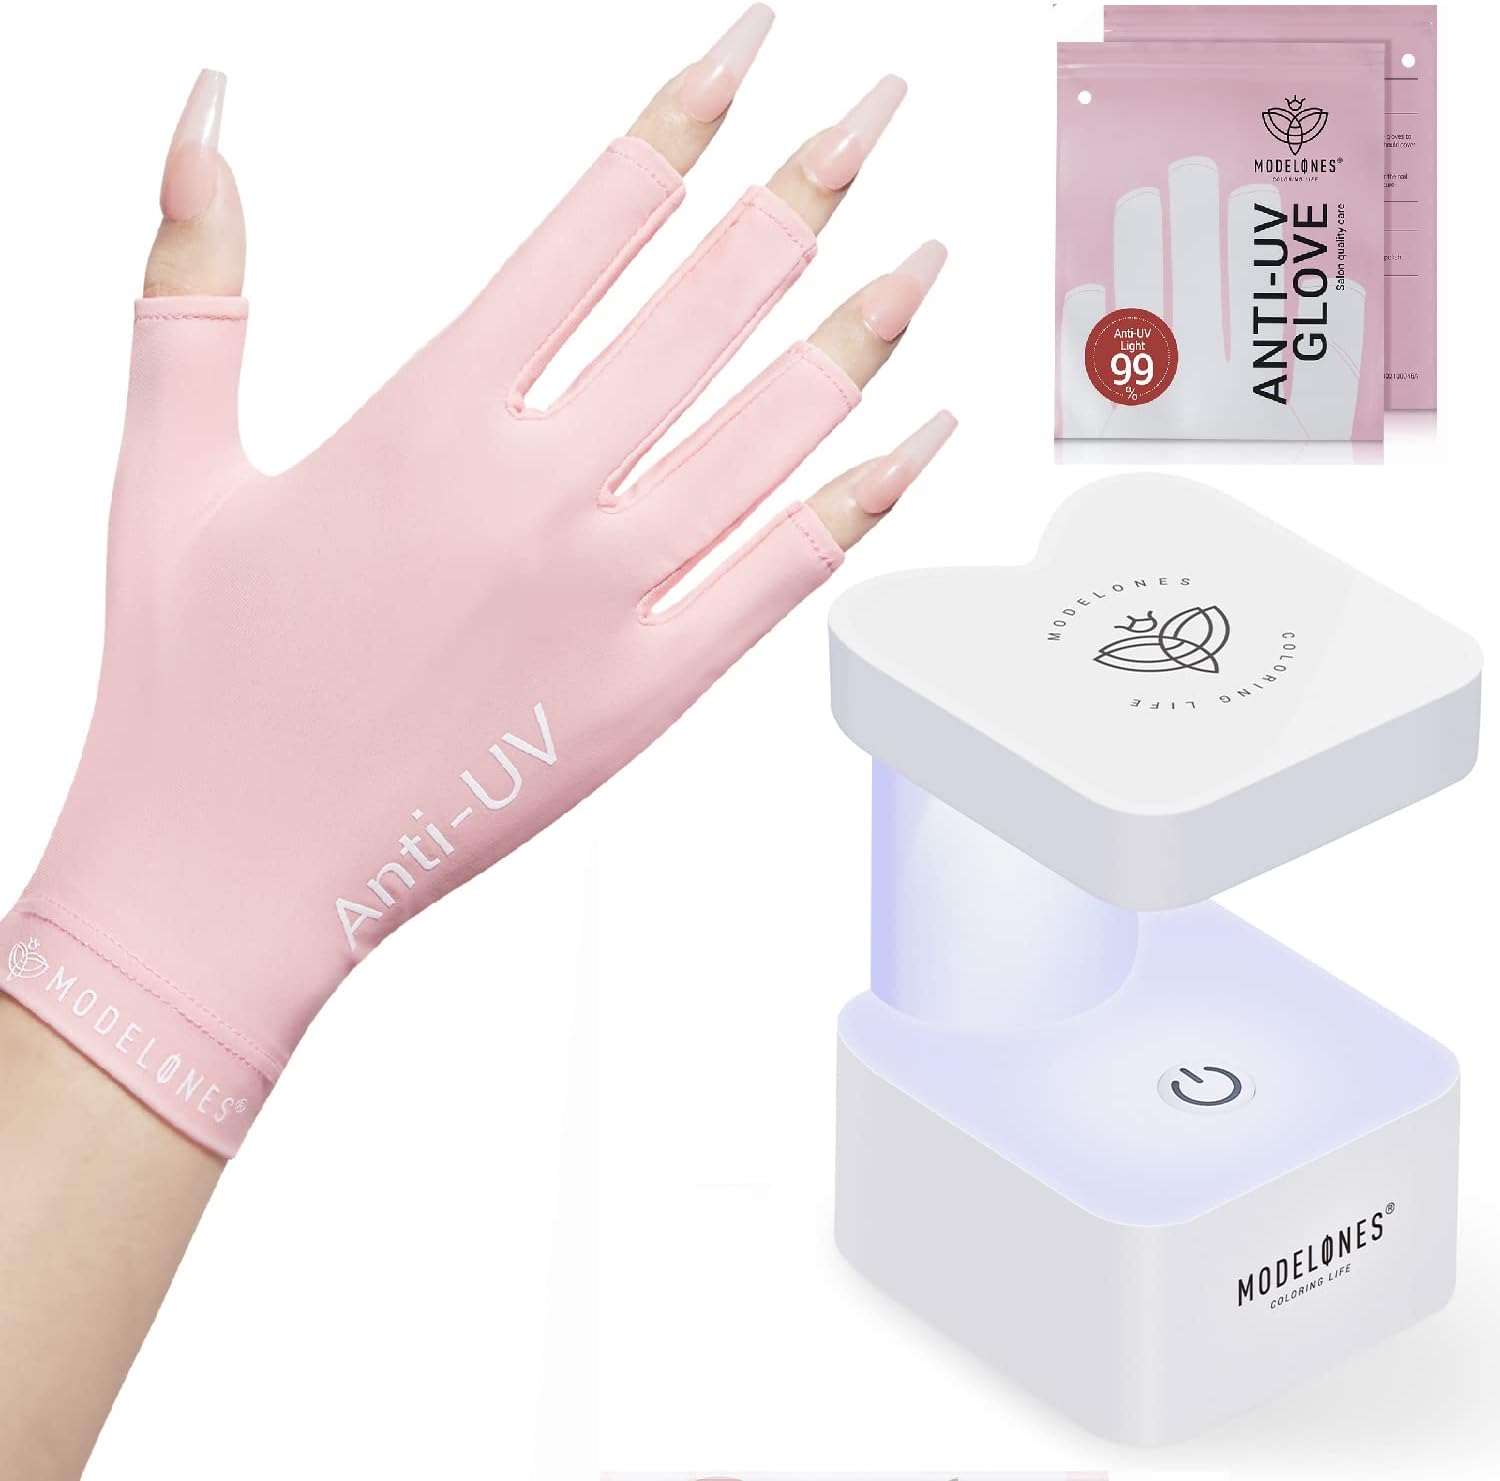 Anti-UV Light Glove With 8W Nail Lamp For Nails Salon Professional UPF 99+【US ONLY】